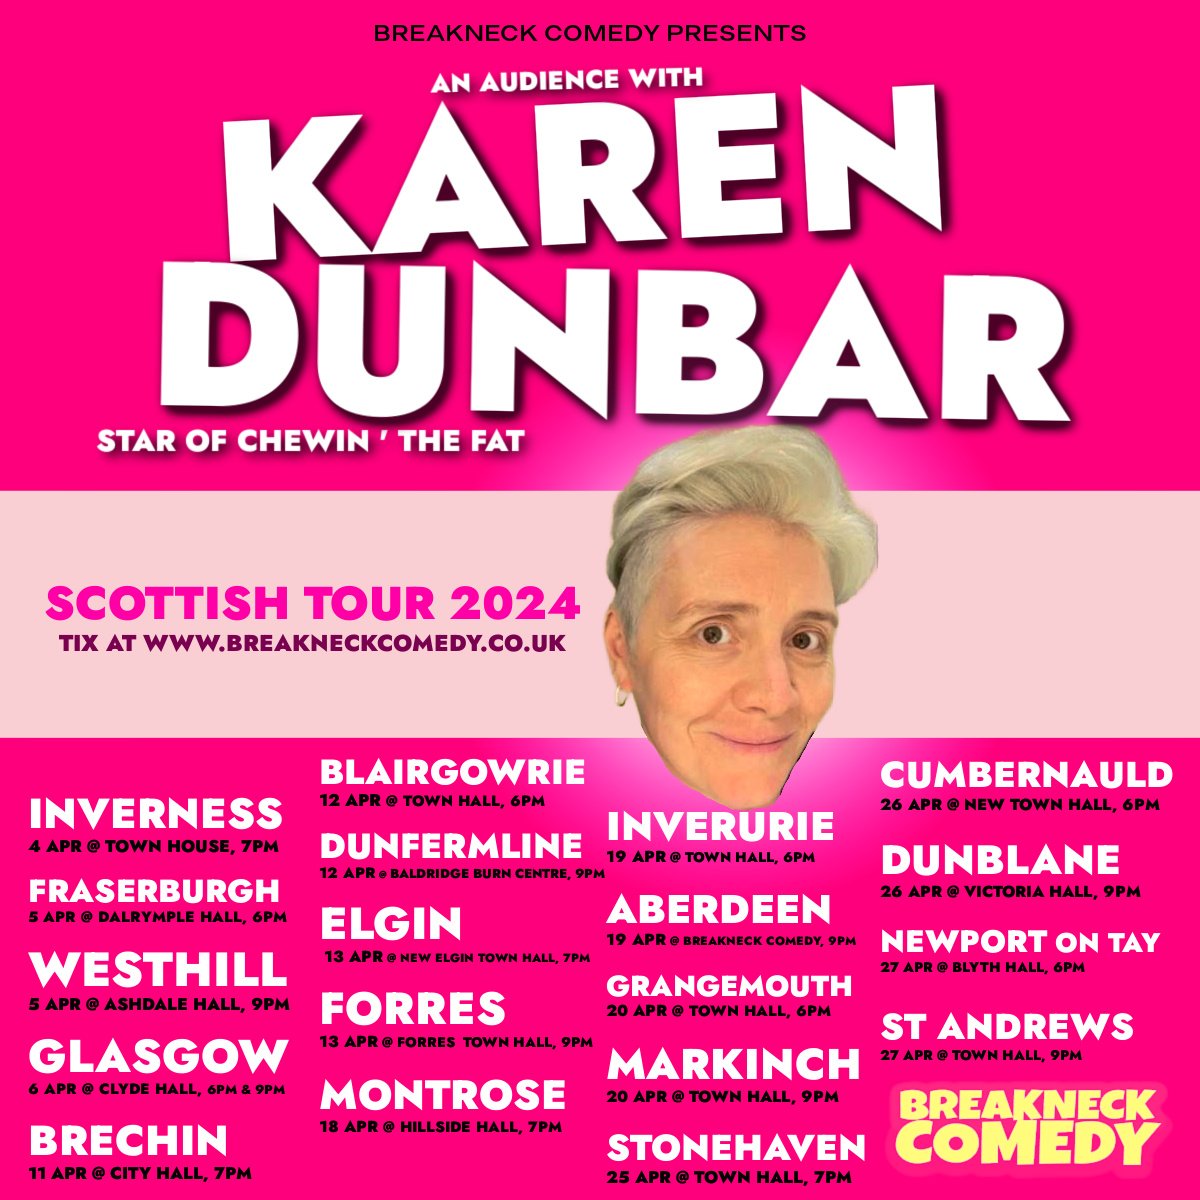 🔥KAREN DUNBAR🔥 is back on tour this April...! Tickets now on sale at breakneckcomedy.co.uk/comedians/kare… Book now before it sells out. @karendunbar147